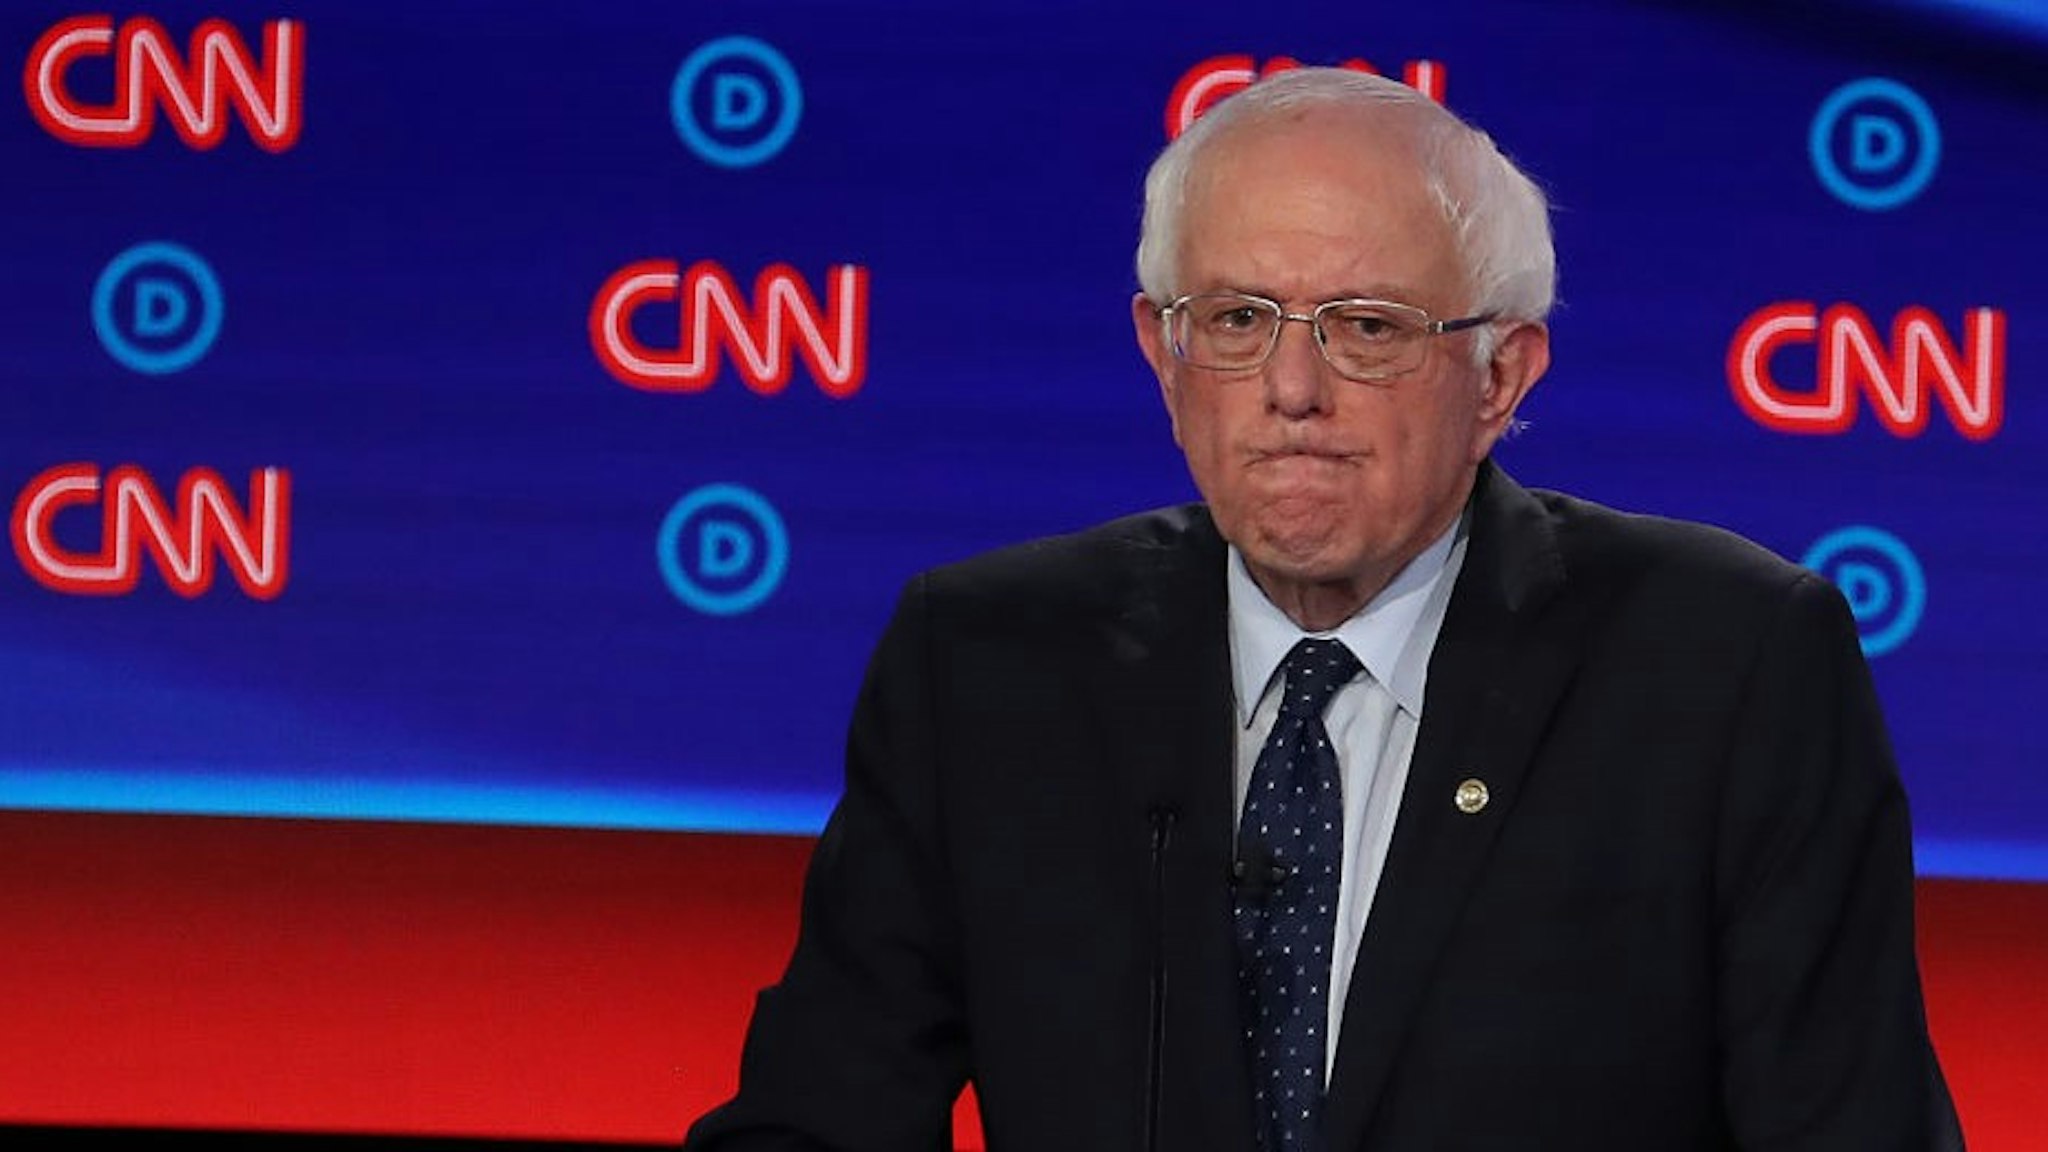 DETROIT, MICHIGAN - JULY 30: Democratic presidential candidate Sen. Bernie Sanders (I-VT) gestures during the Democratic Presidential Debate at the Fox Theatre July 30, 2019 in Detroit, Michigan. 20 Democratic presidential candidates were split into two groups of 10 to take part in the debate sponsored by CNN held over two nights at Detroit’s Fox Theatre. (Photo by